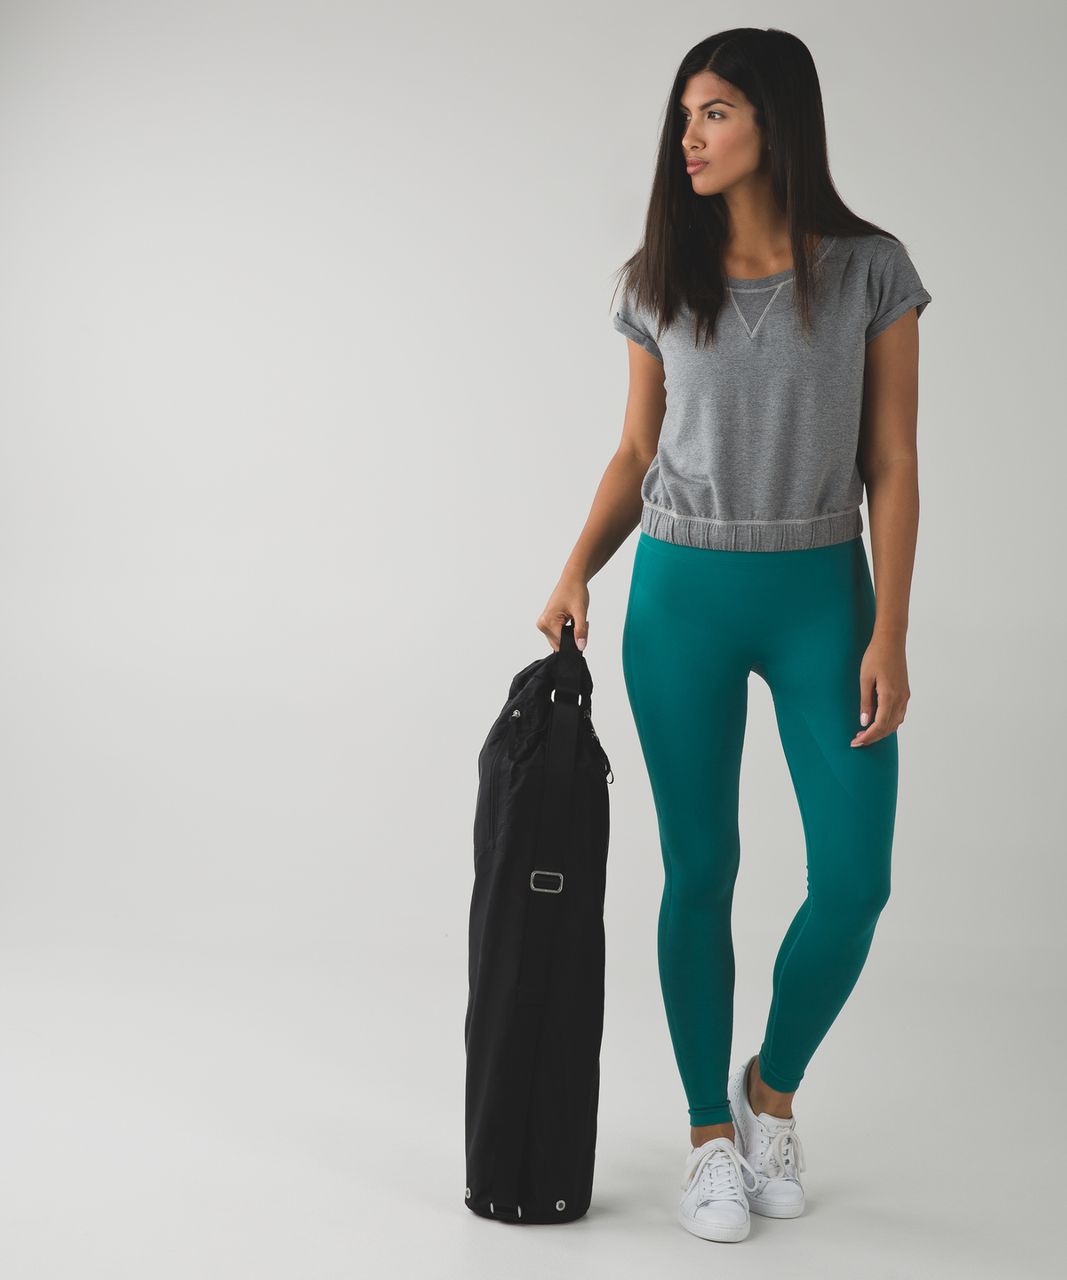 Lululemon Zone In Tight - Forage Teal